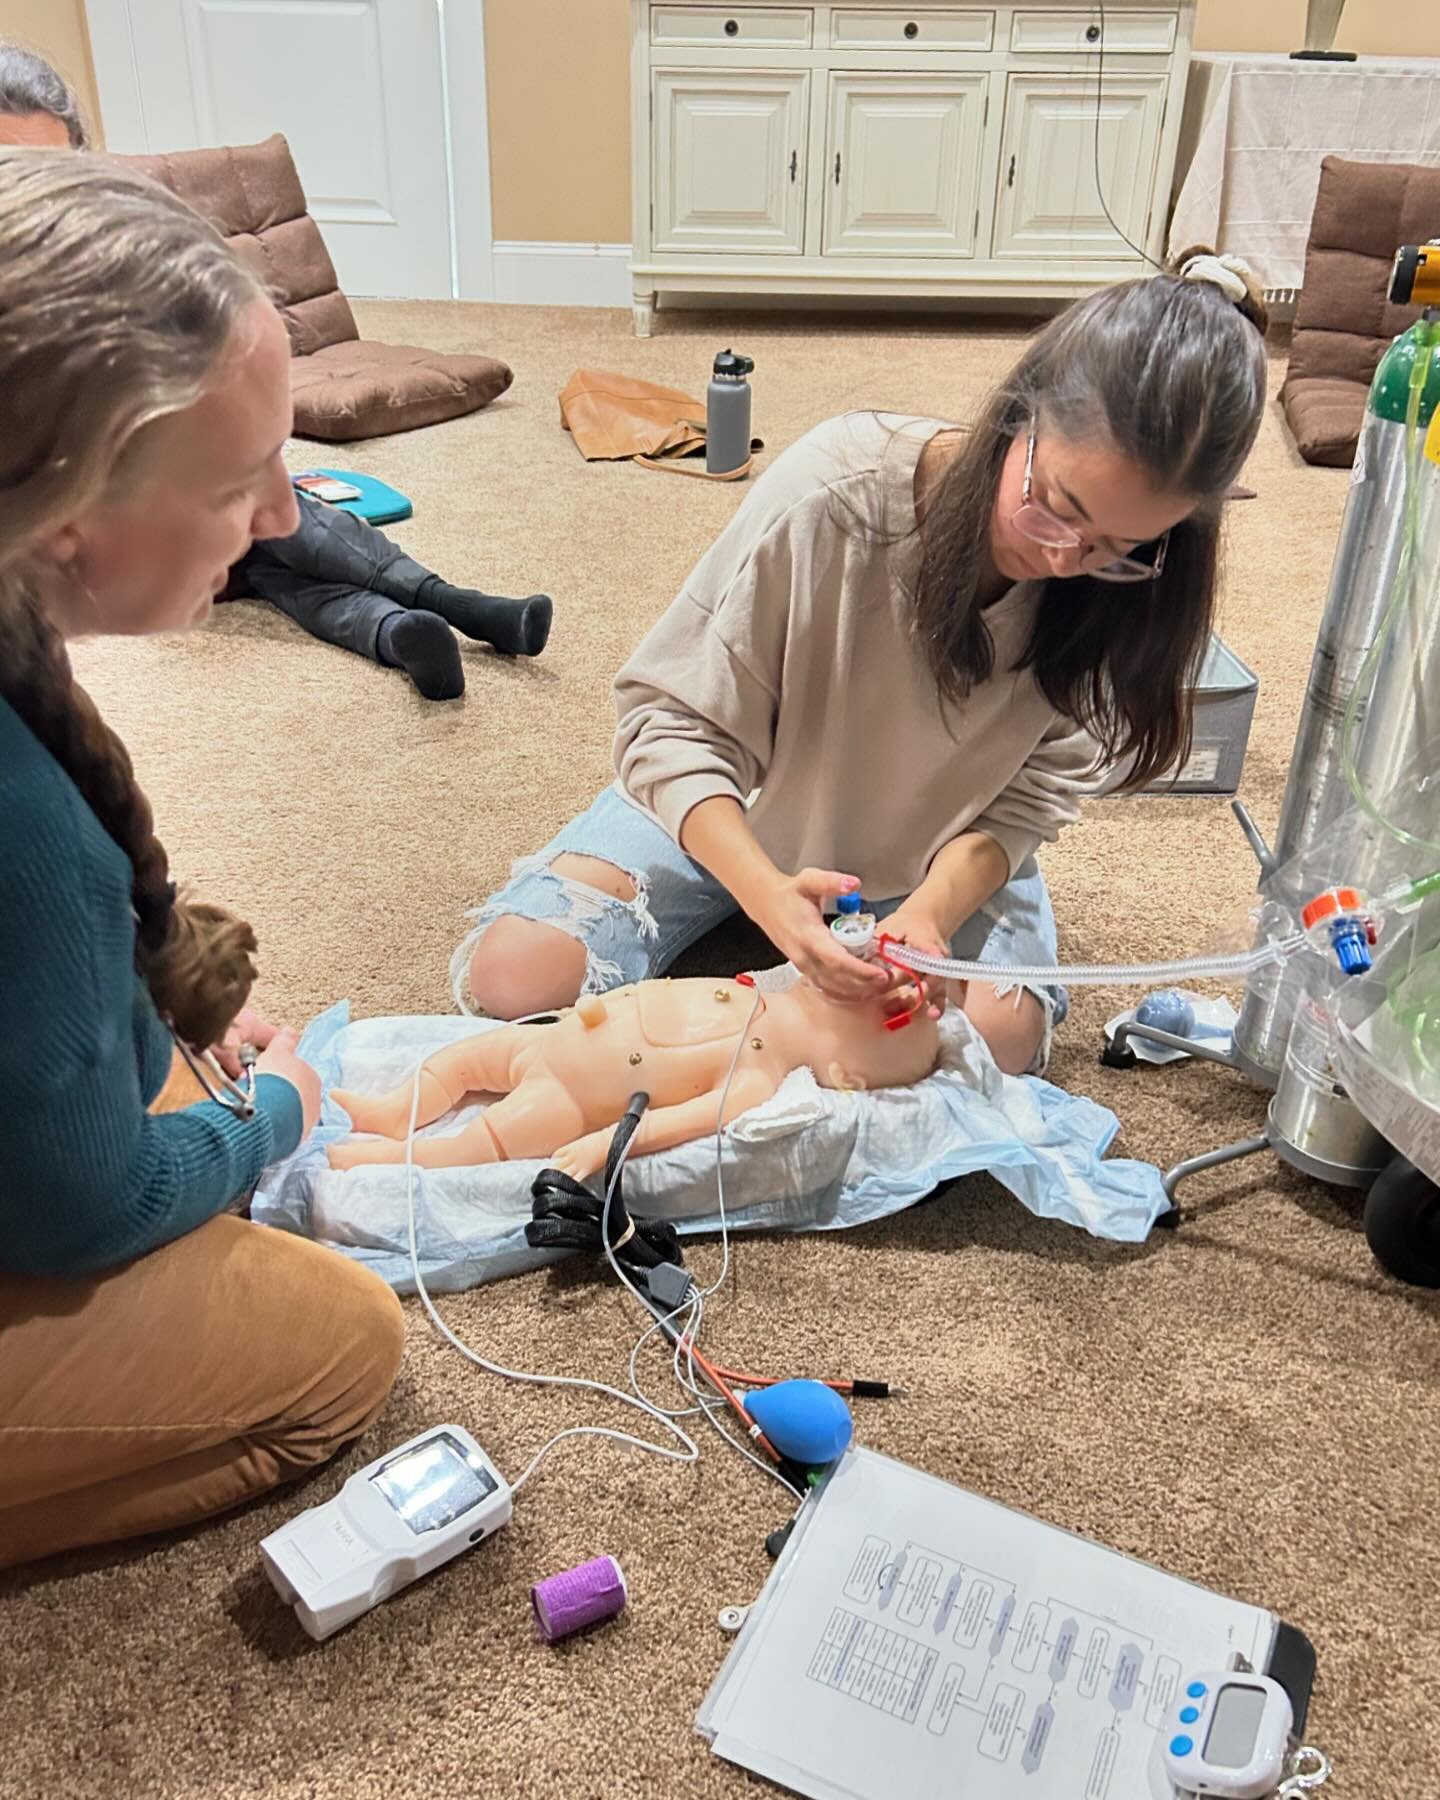 Running frequent emergency drills to keep our skills sharp is an important part of our practice! Here our birth assistants Mandy and Sin&eacute;ad practice NRP (neonatal resuscitation).